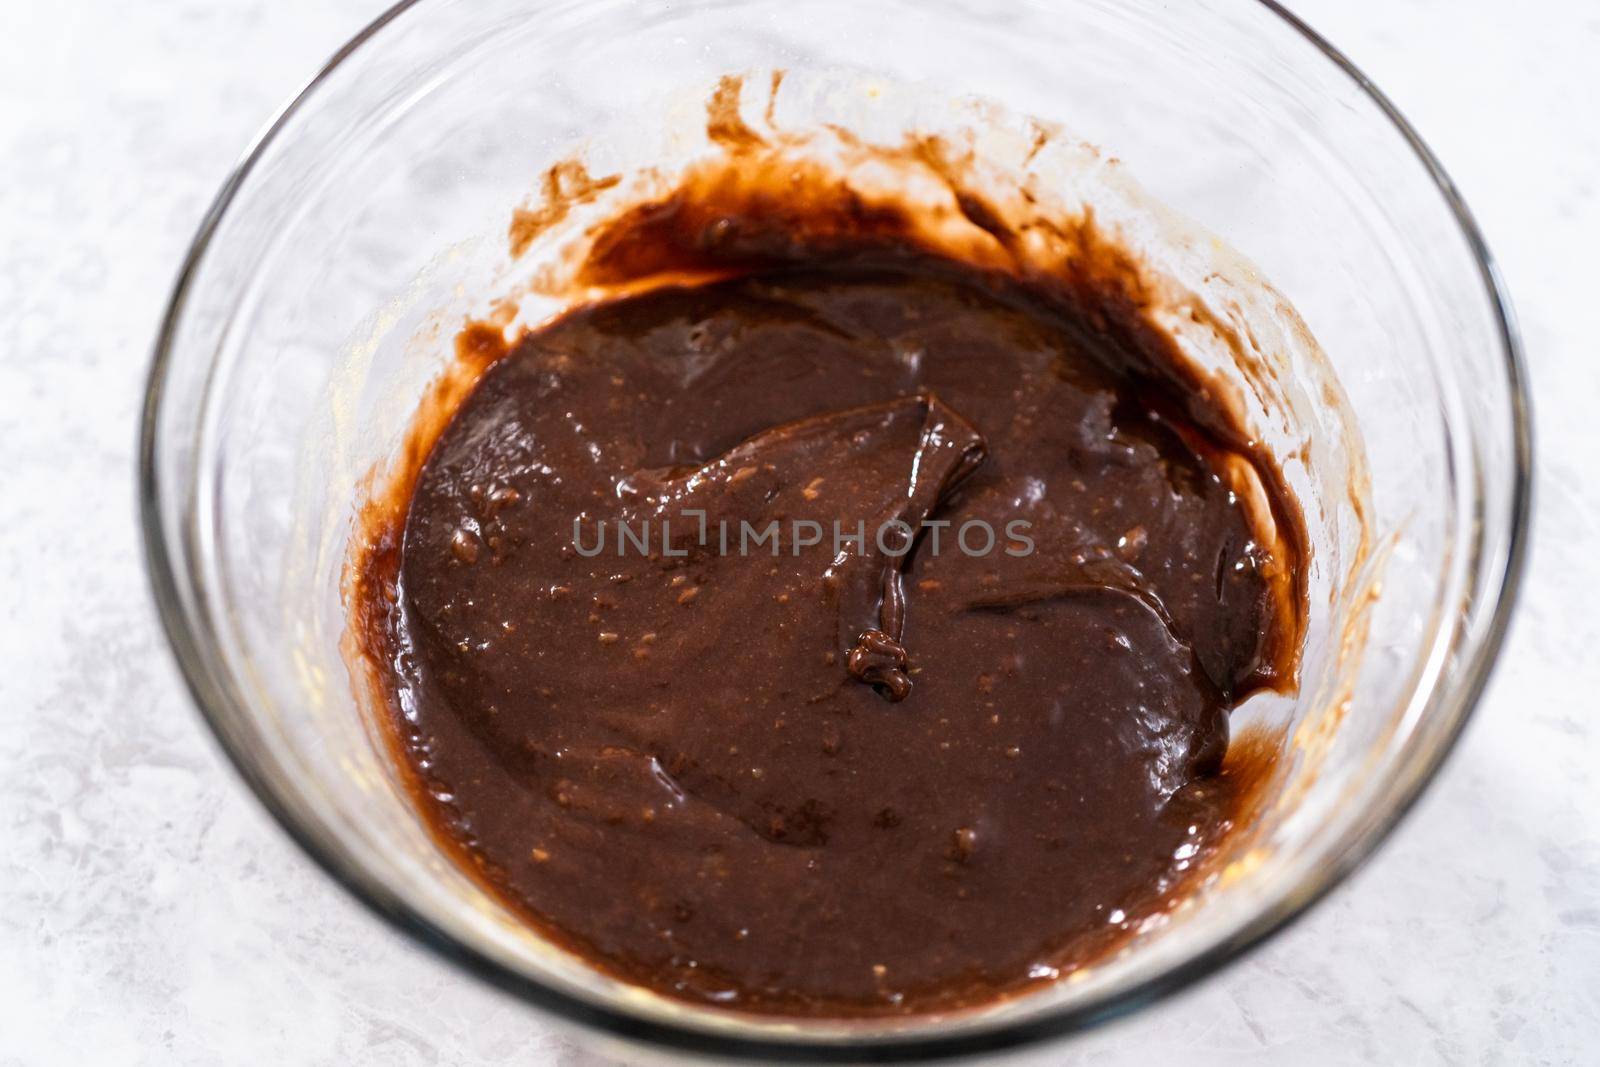 Chocolate cake dough in a glass mixing bowl on the counter.